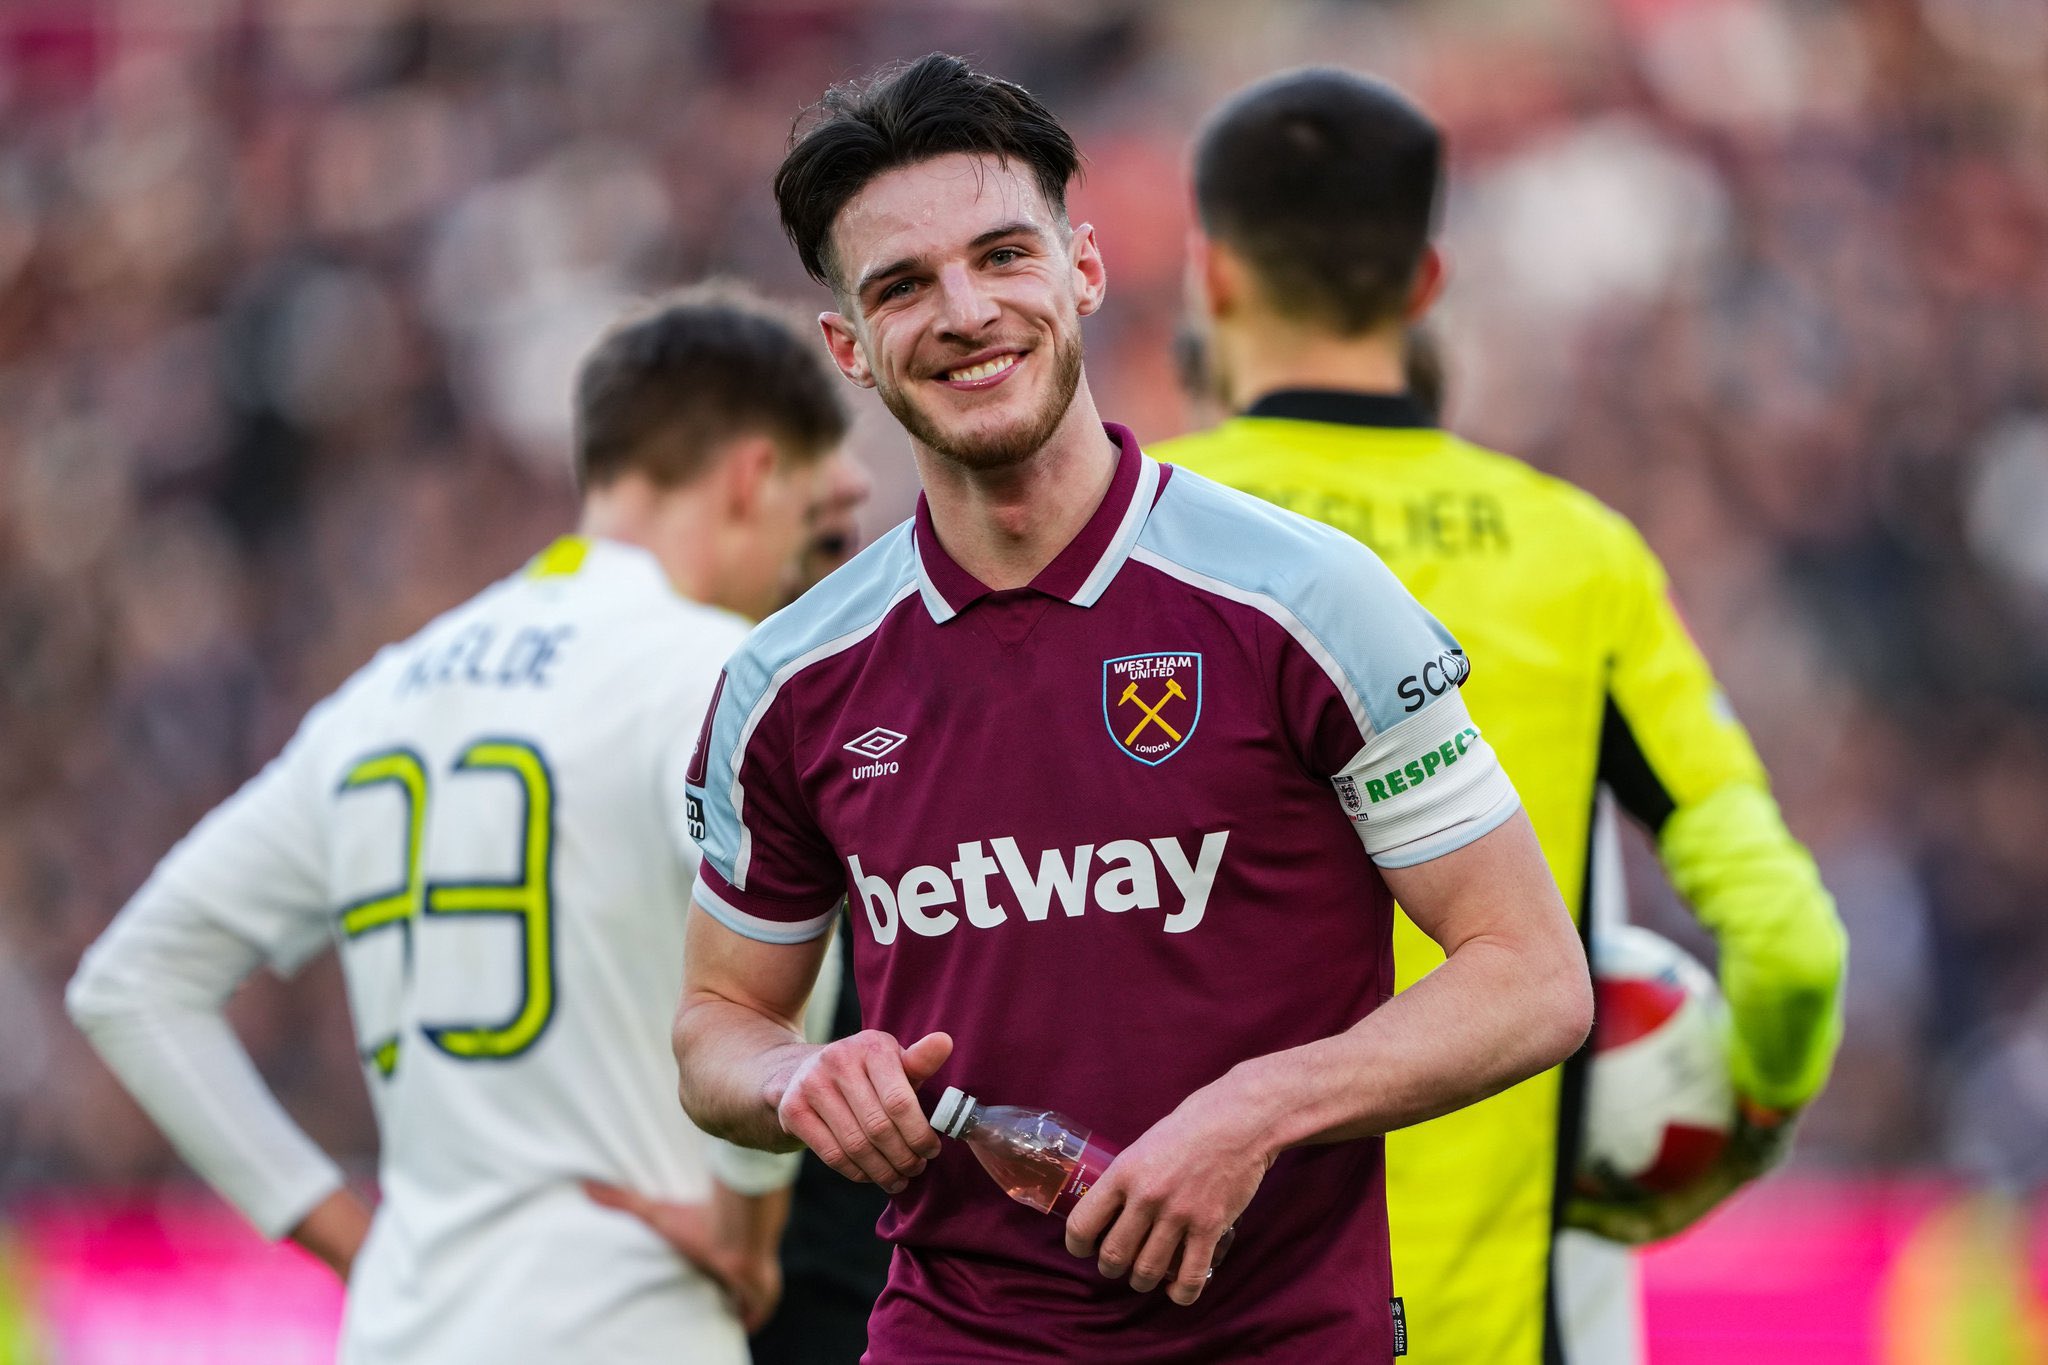 With my ability I want to start scoring more goals, reveals Declan Rice